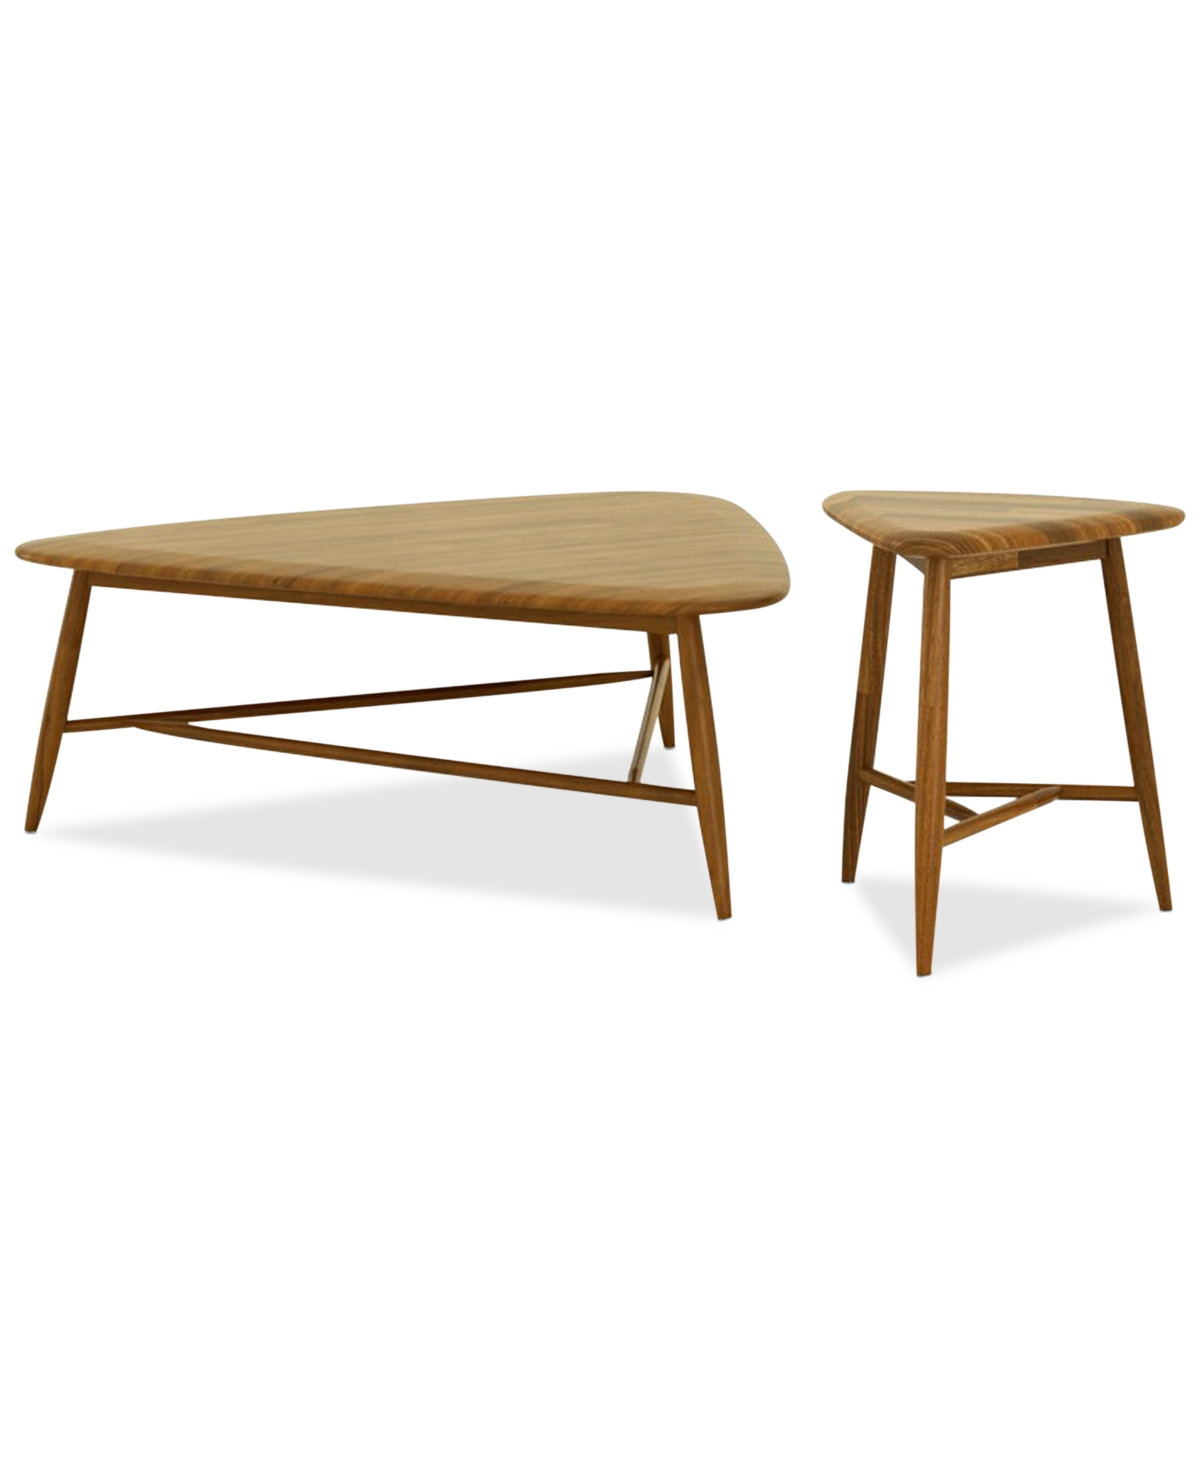 Eq3 Bernia Triangular Coffee And End Table 2pc Set In No Color